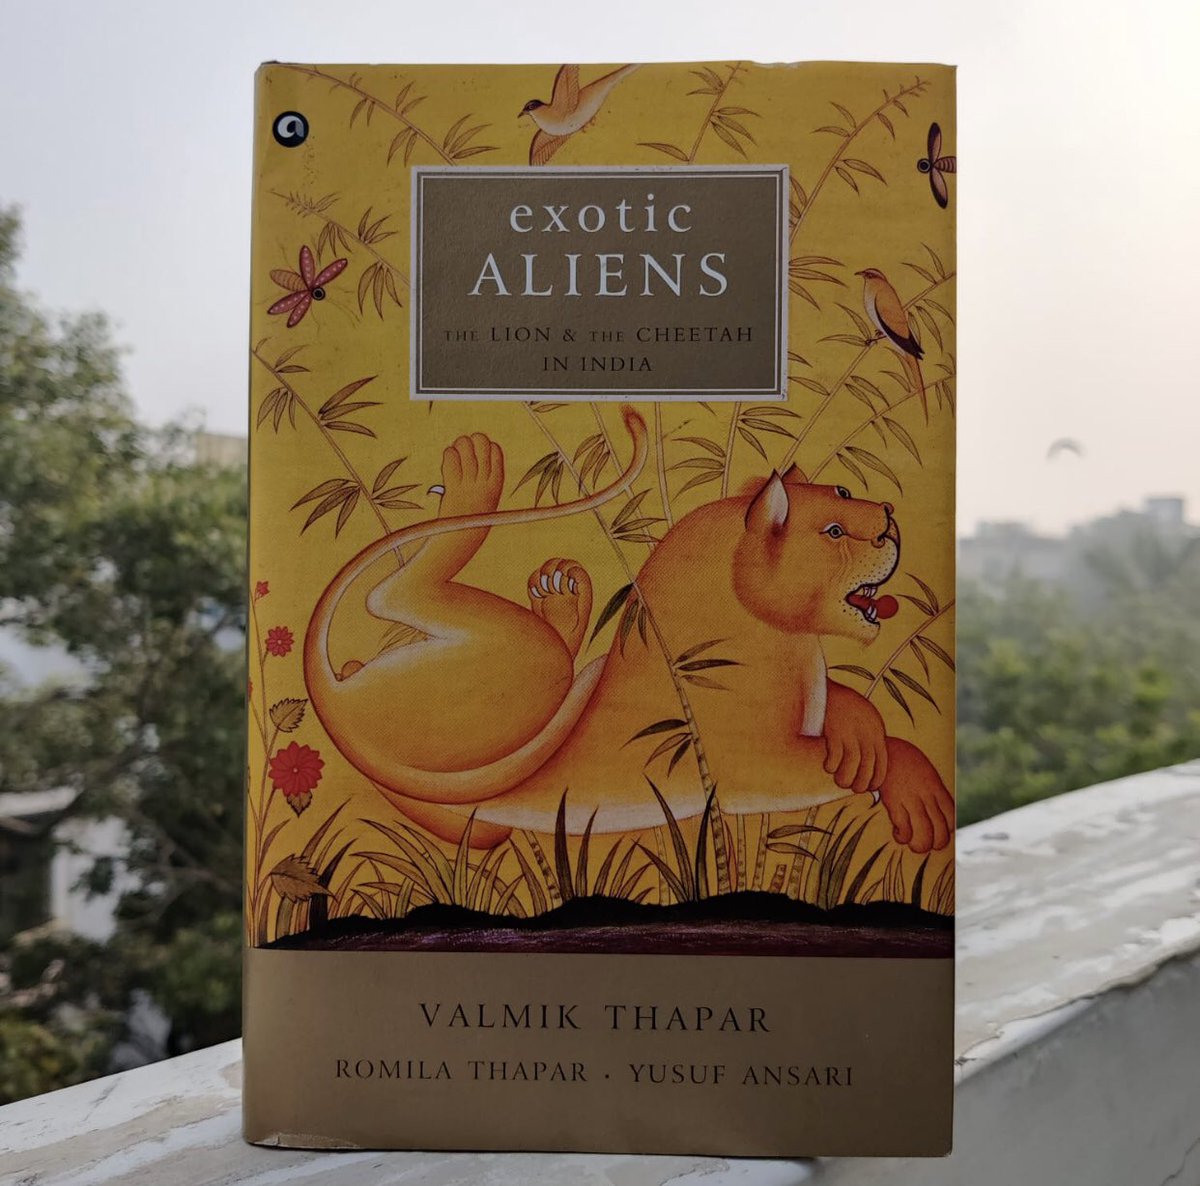 In 2012 I had the privilege to co-author “Exotic Aliens” a history of the Lion and the Cheetah in India with Prof. Romila Thapar - arguably India’s greatest living historian & Valmik Thapar, a prodigious scholar of Natural History. A thread on the #Cheetah: based on our findings.